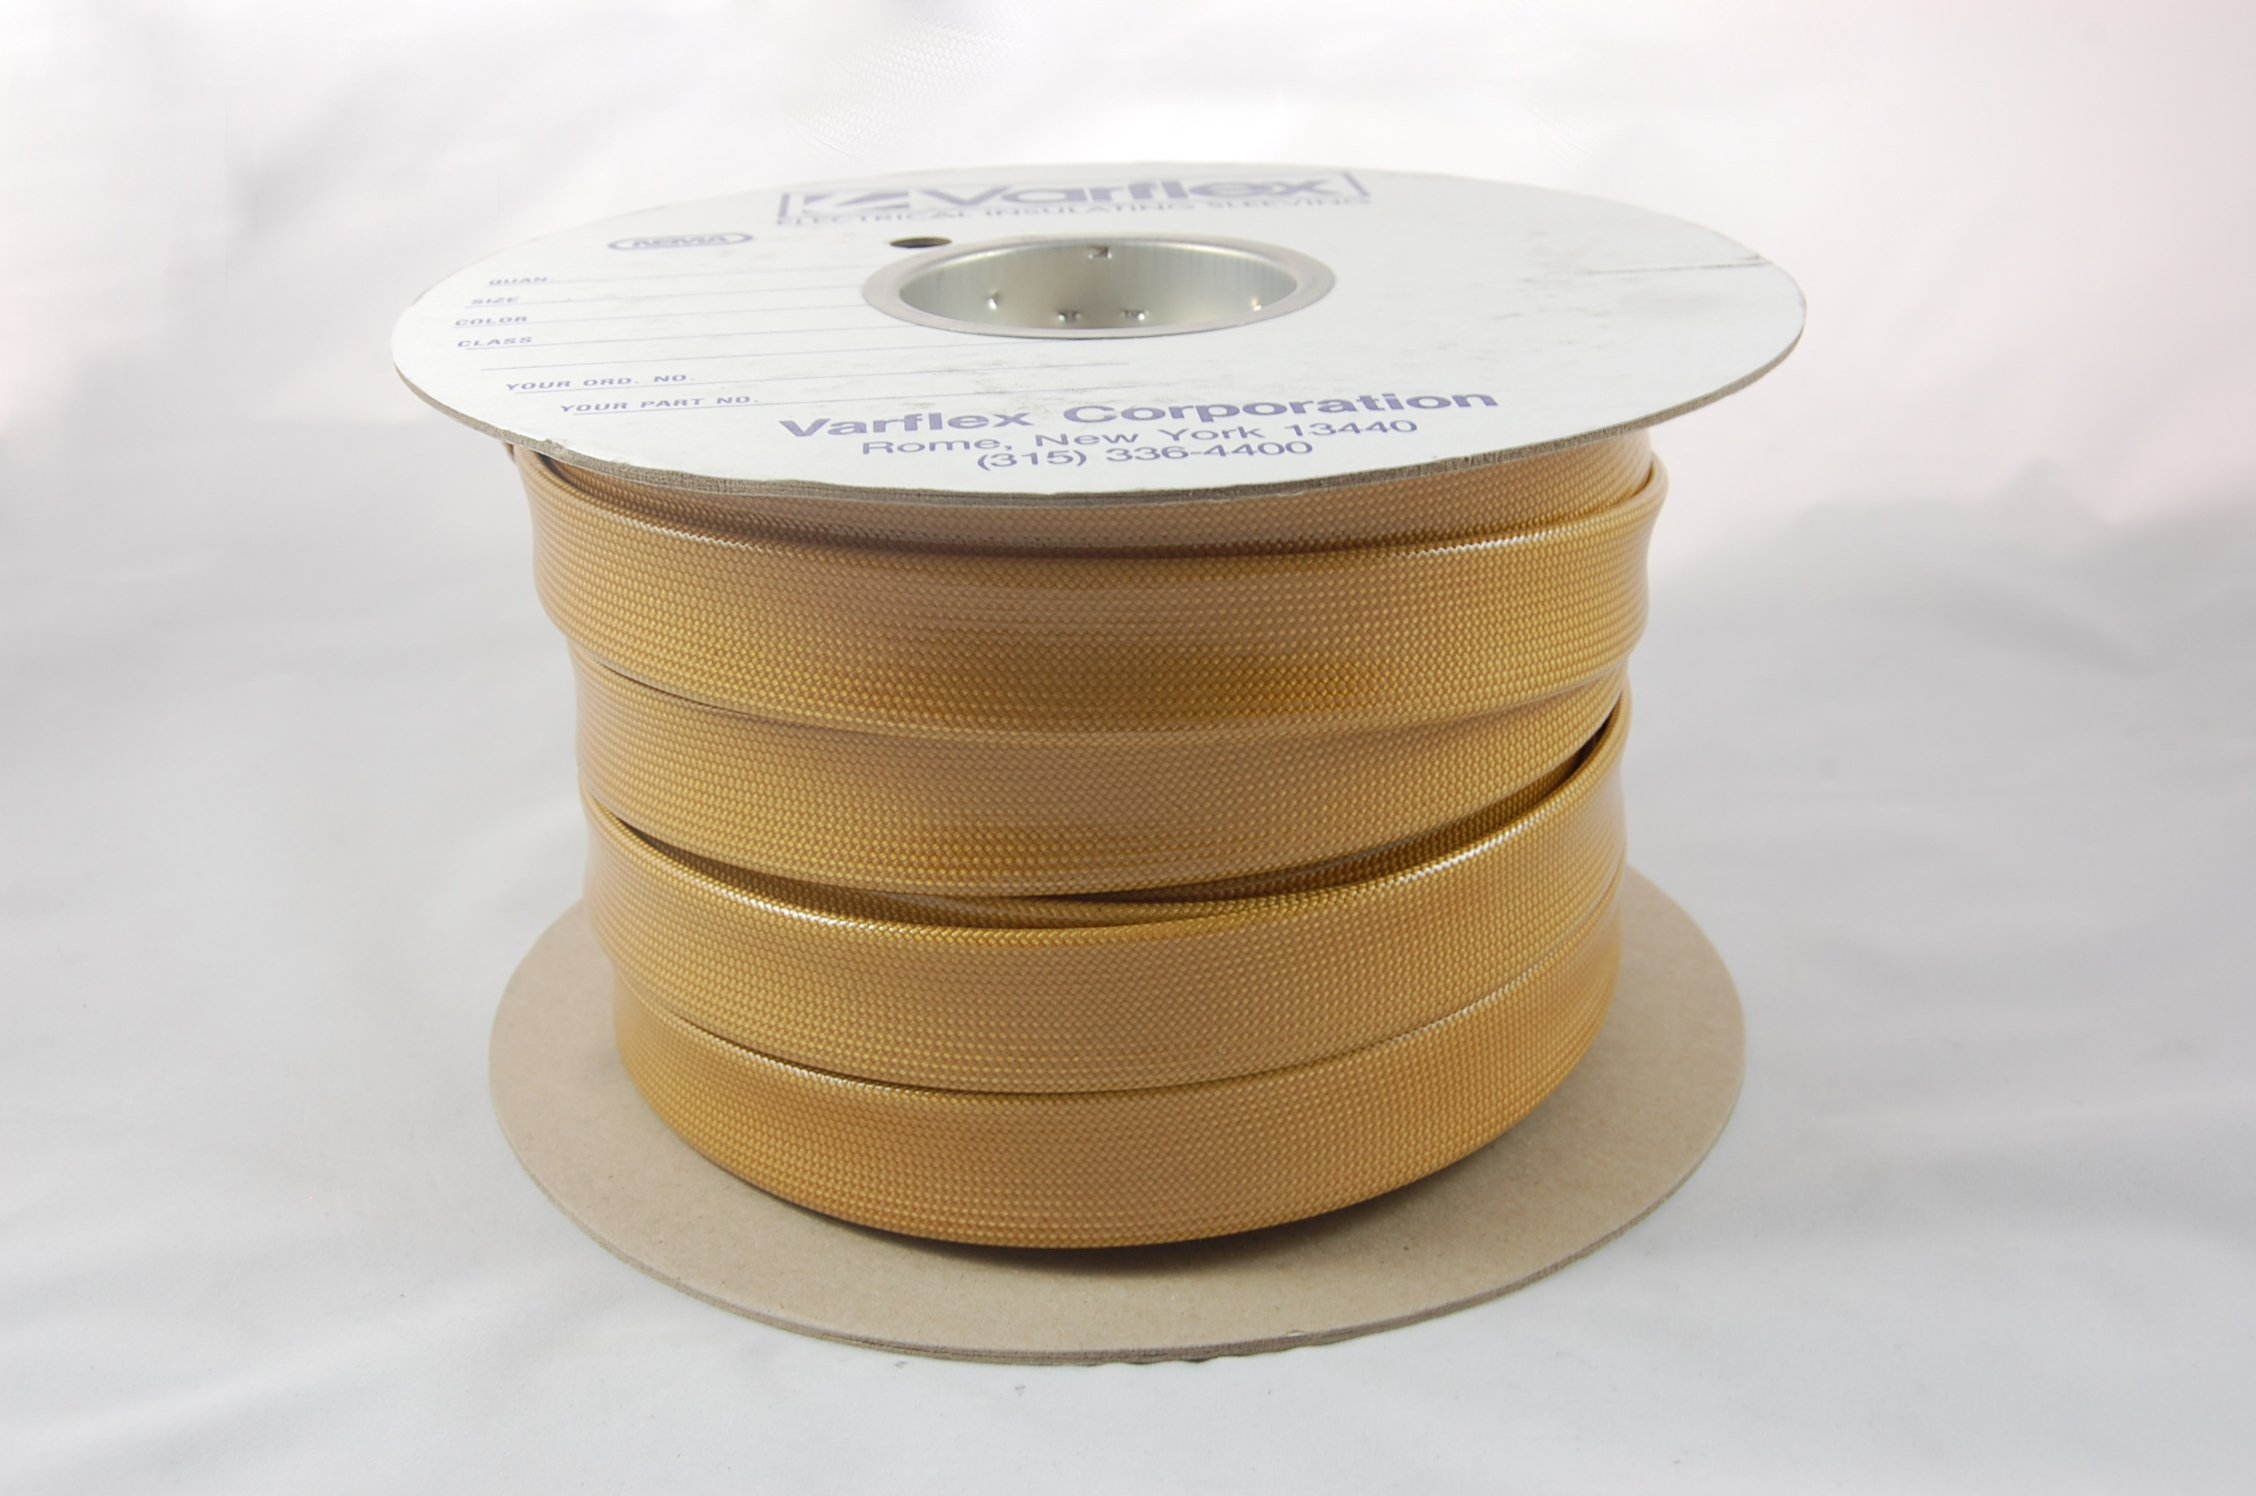 #1 AWG Varglas Silicone Resin 500 Grade H-C-1 (2500V) High Temperature Silicone Resin Coated Braided Fiberglass Sleeving 200°C, natural, 150 FT per spool